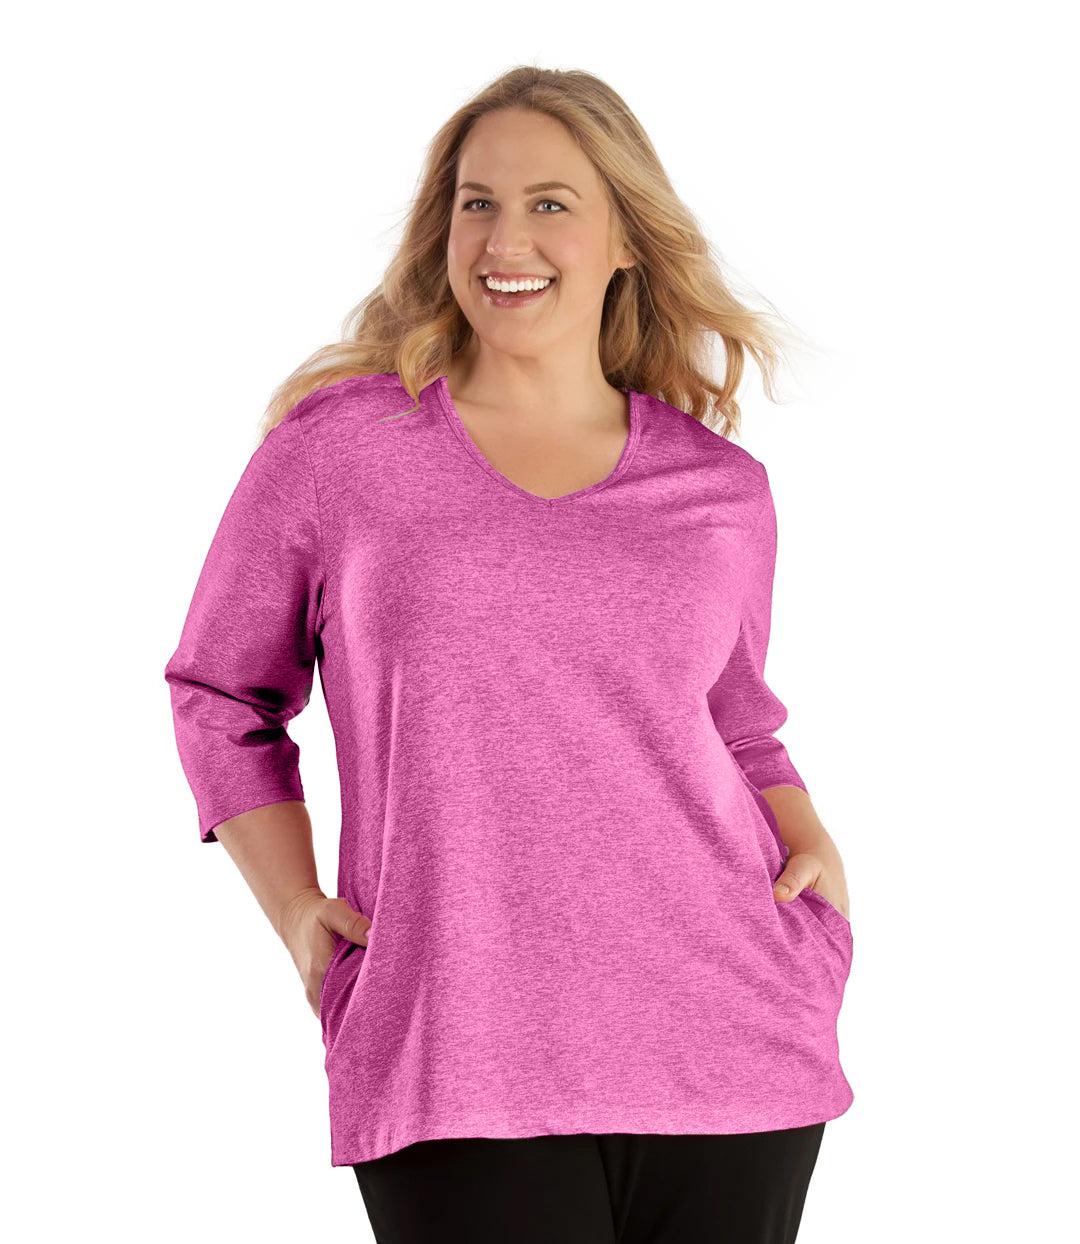 Plus size woman, facing front, wearing JunoActive plus size SoftWik V-Neck ¾ Sleeve Top with Pockets in the color Heather Fuschia. She is wearing JunoActive Plus Size Leggings in the color Black.